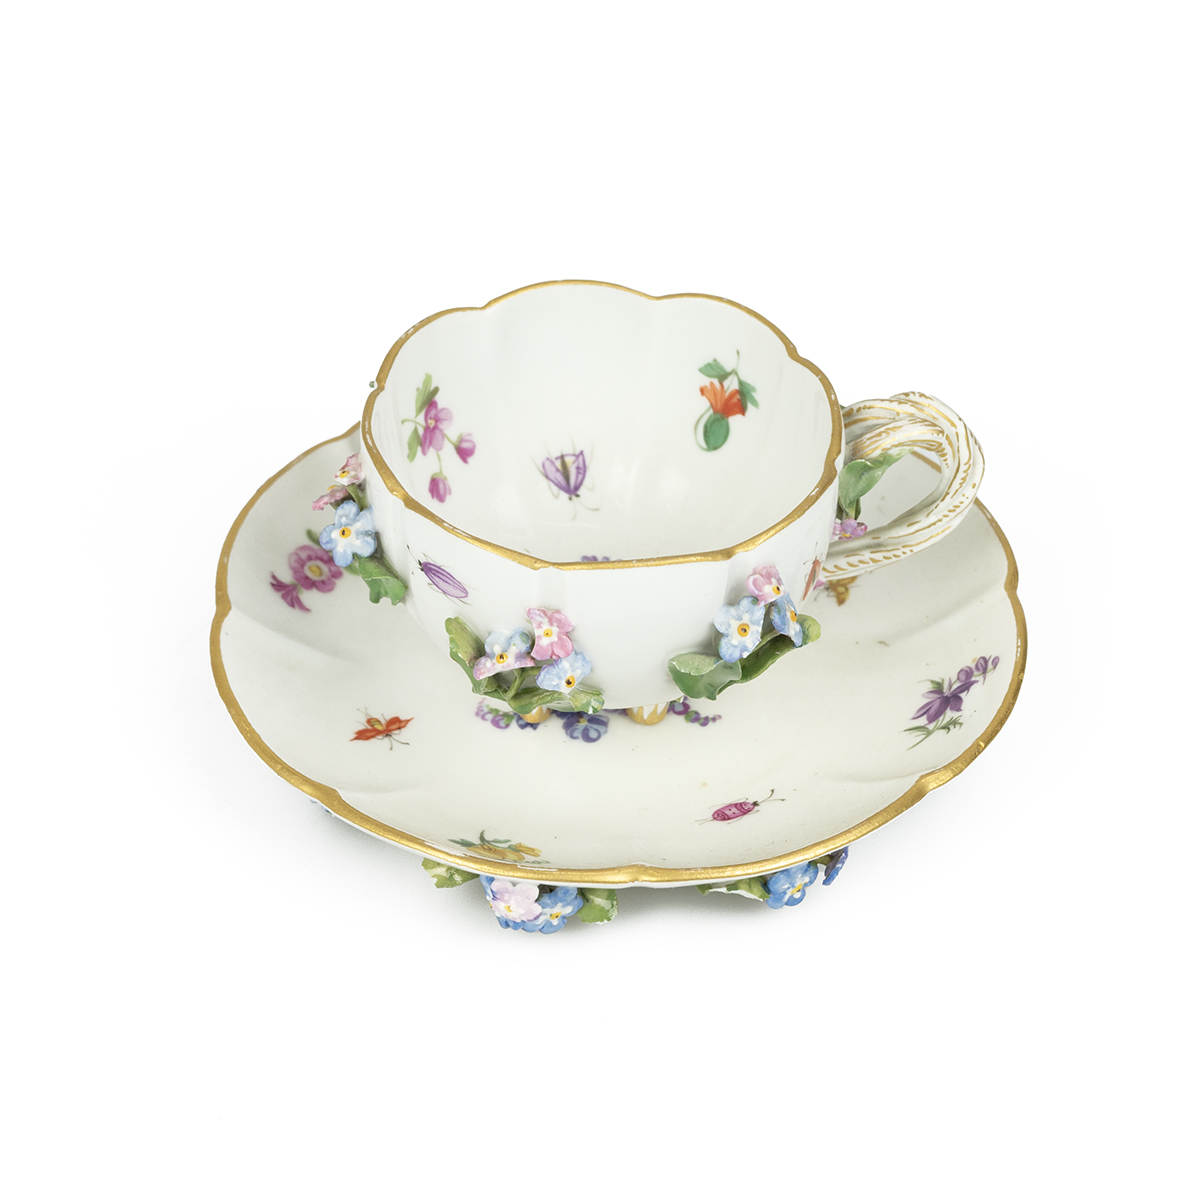 A 19th Century "Flowers and Bugs" tea cup and saucer encrusted with flowers, bearing the Meissen ... - Image 3 of 4